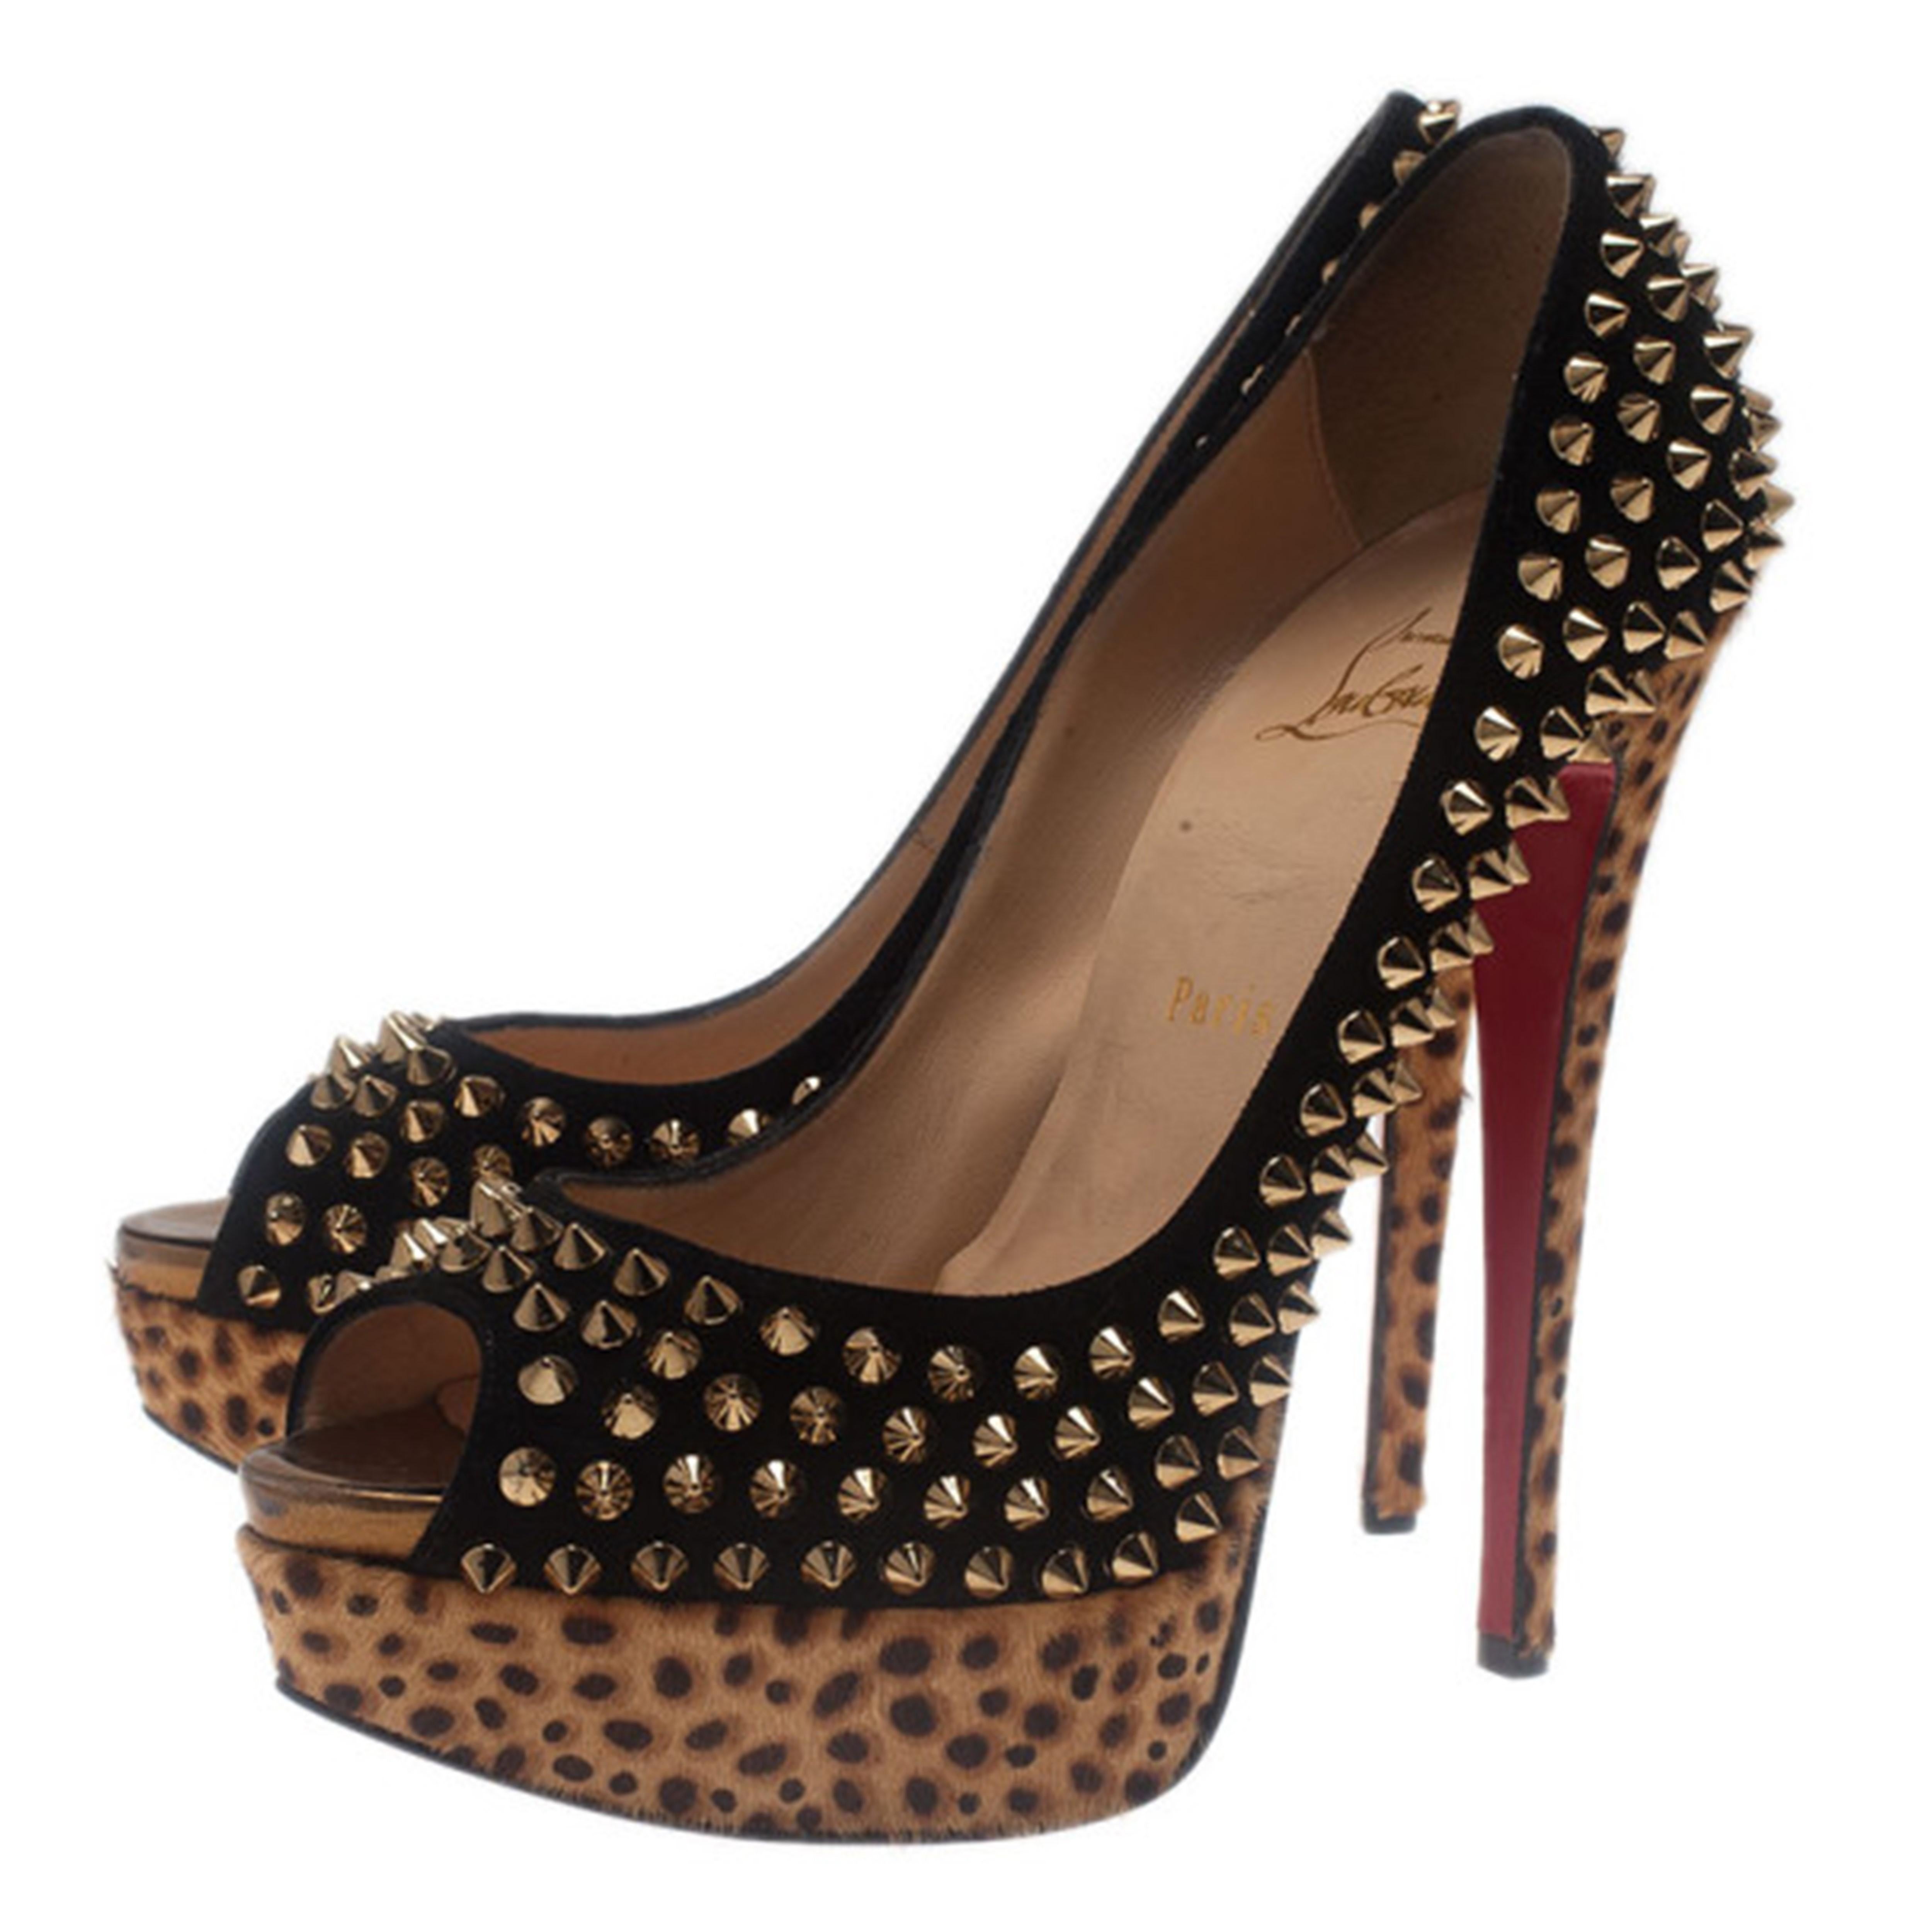 Christian Louboutin Black Suede Leopard Pony Hair Lady Peep Spikes Pumps Size 39 6